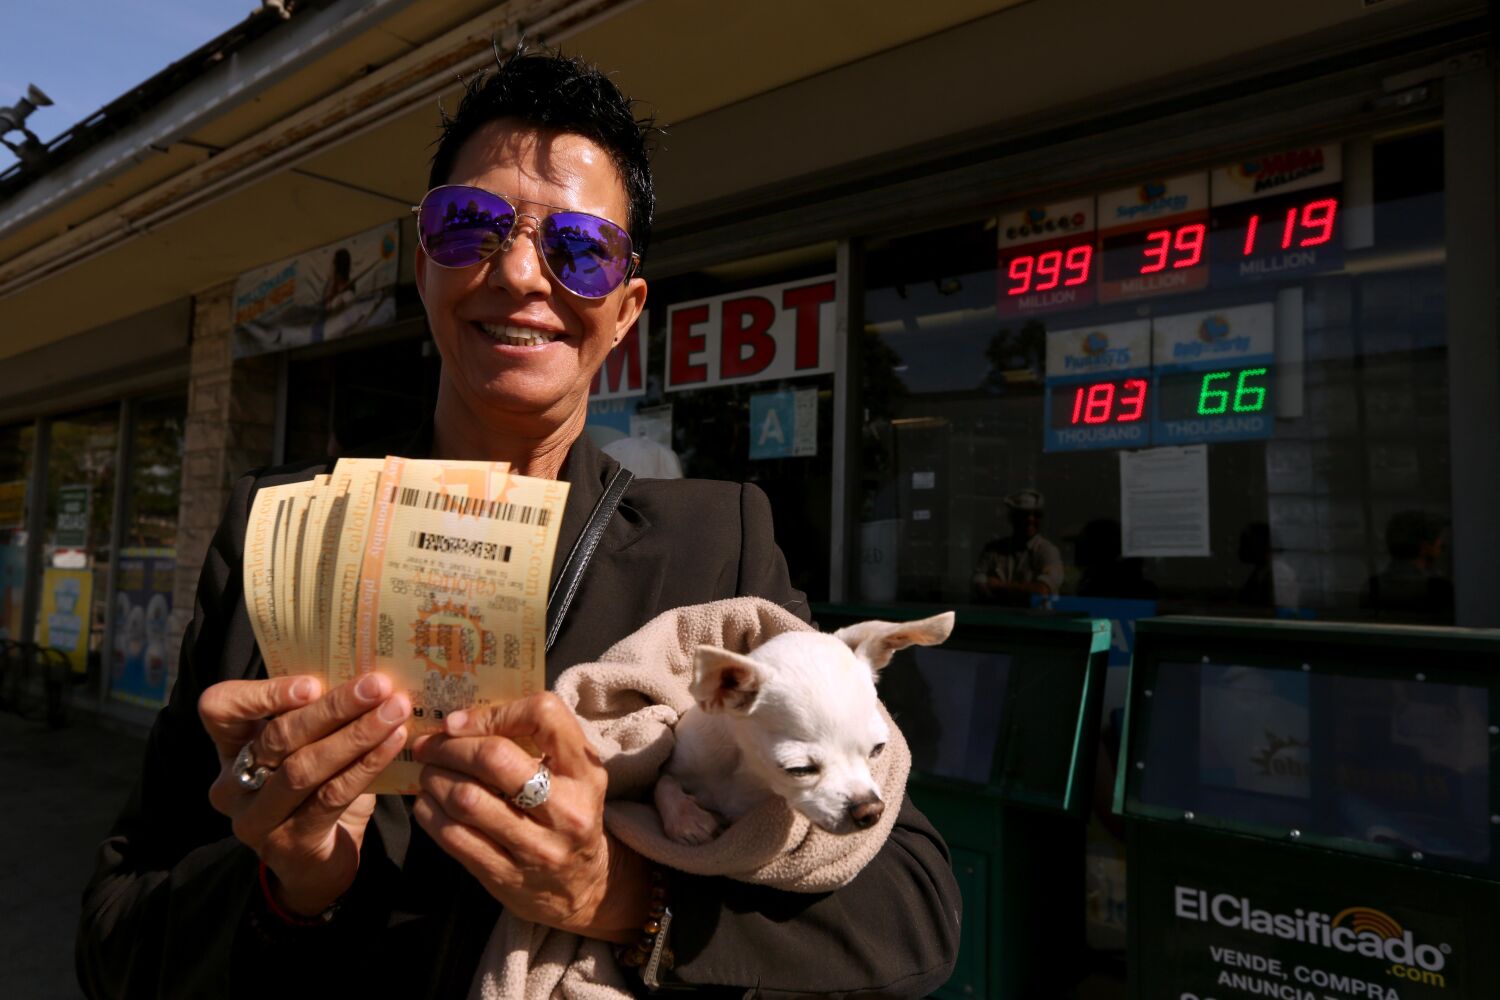 Cross your fingers: Powerball climbs to $1.6 billion, setting all-time record for Saturday drawing